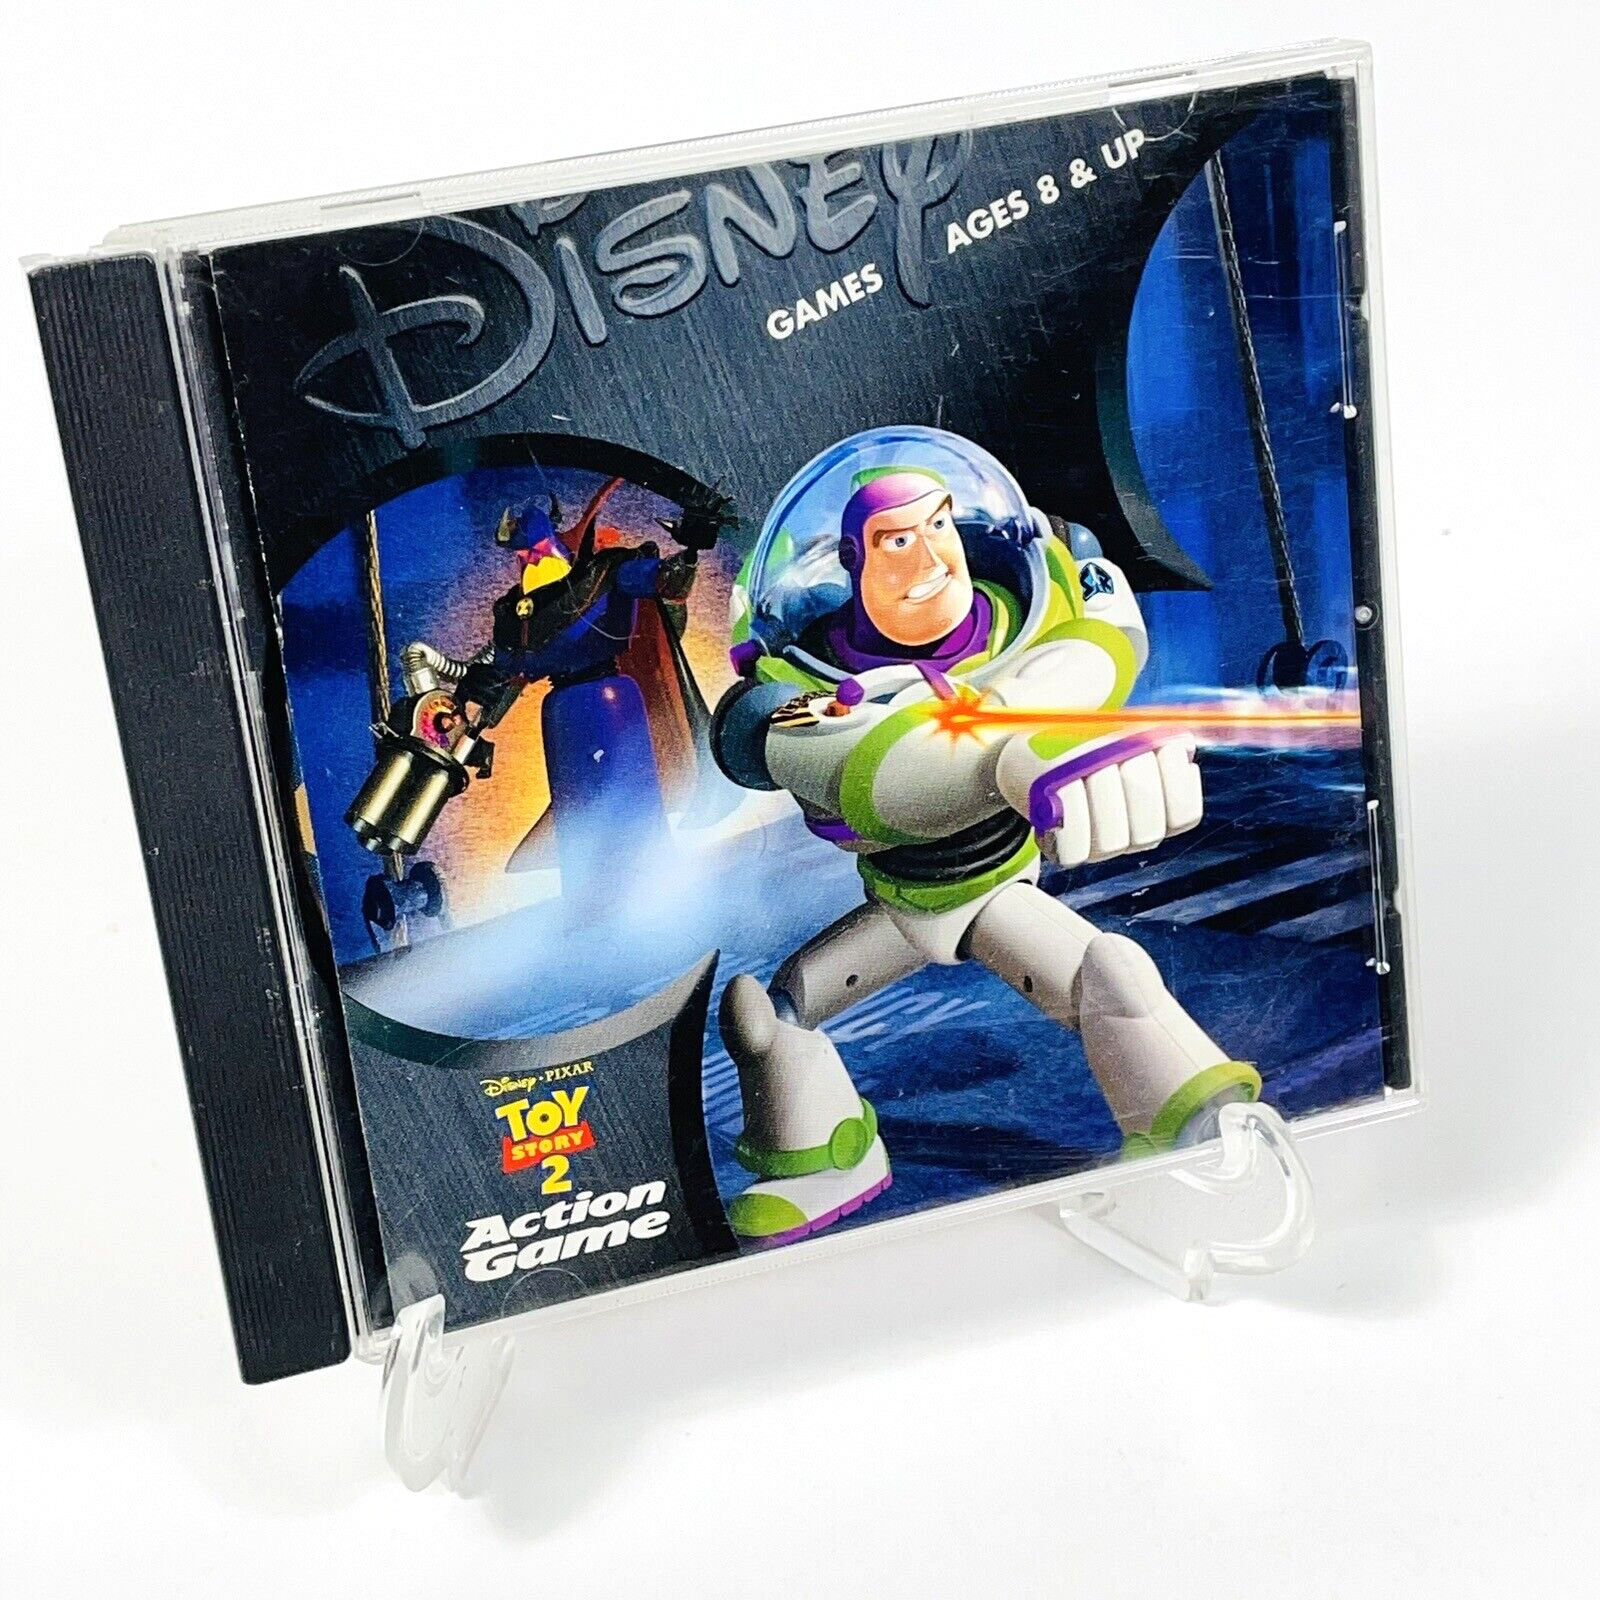 Disney Pixar Toy Story 2 Action Game PC CD-ROM Video Game